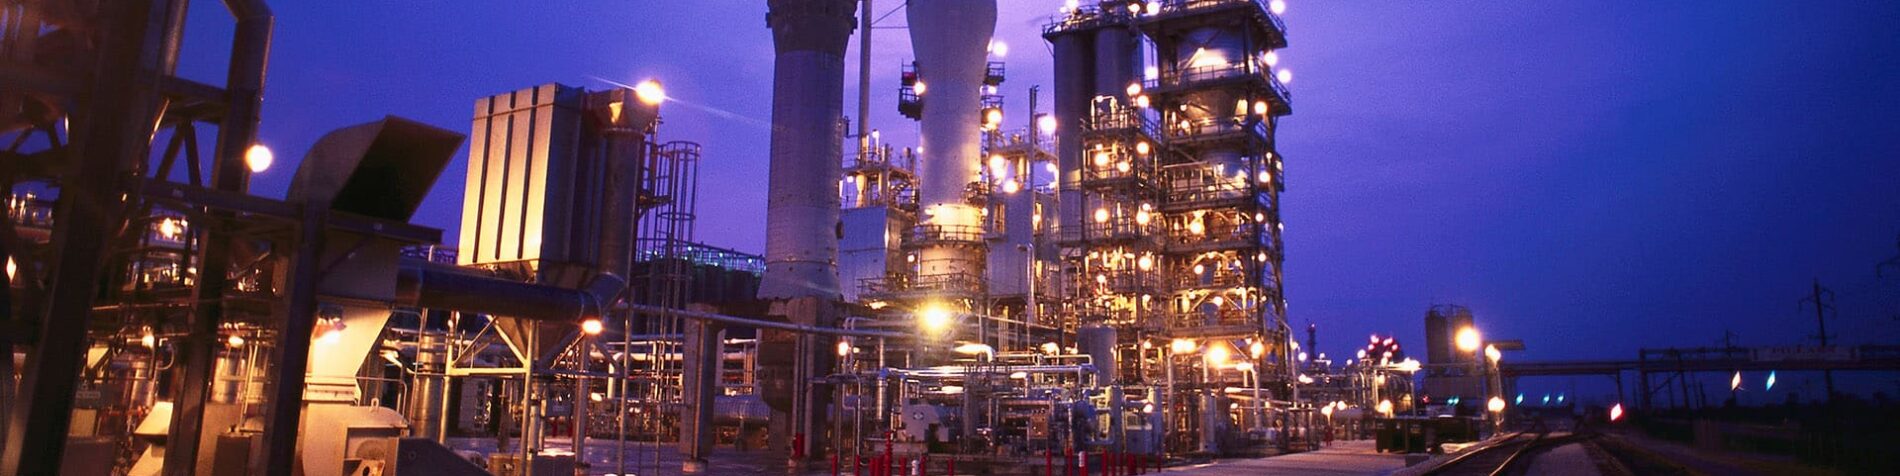 Delek US Conquers ERP Complexity with RISE with SAP